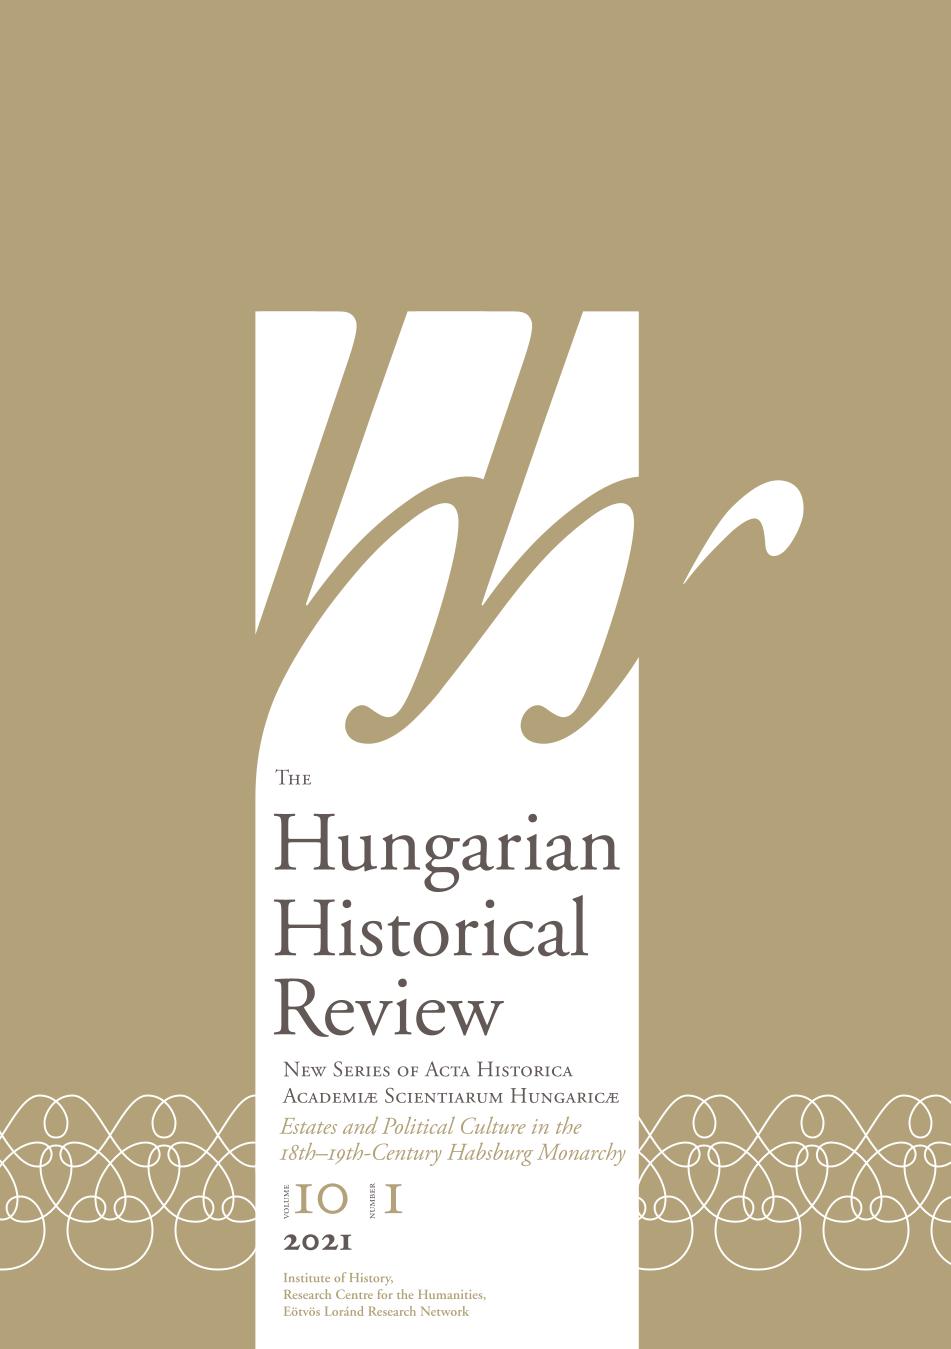 Estates and Constitution: The Parliament in Eighteenth-Century Hungary